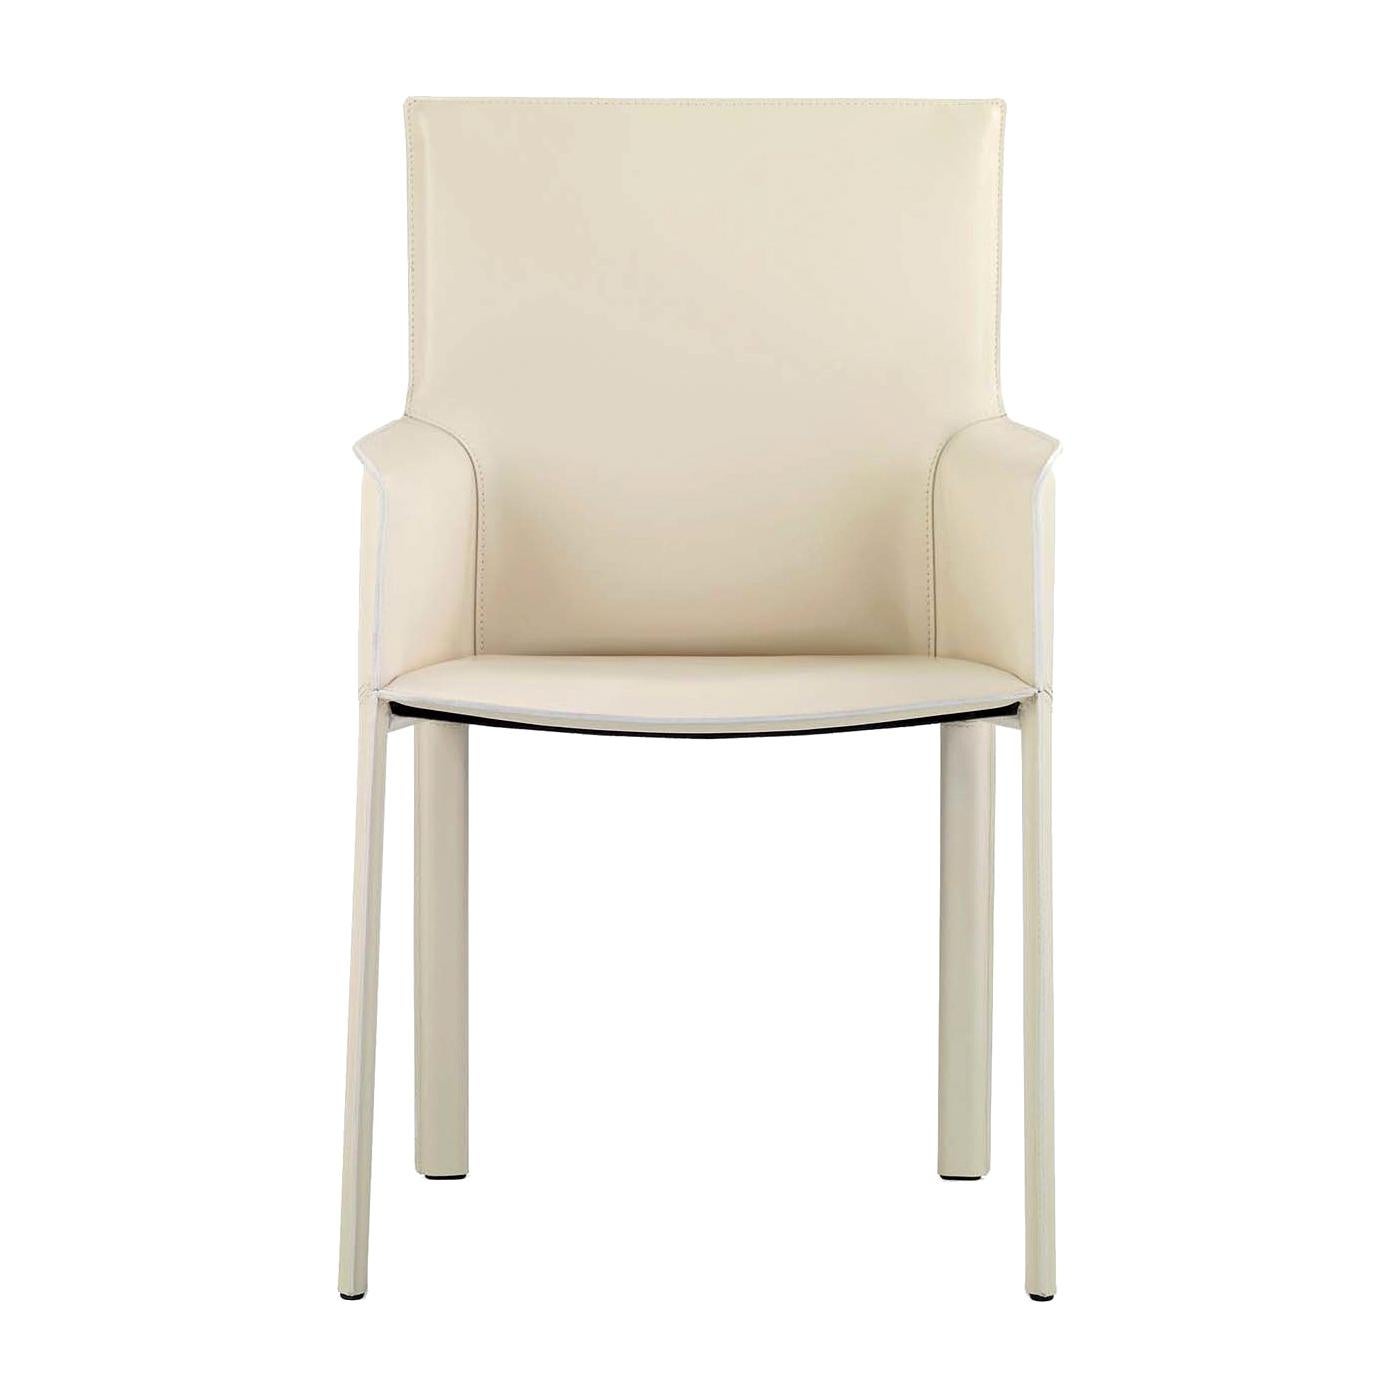 High-Back Pasqualina Armchair by Grassi & Bianchi For Sale